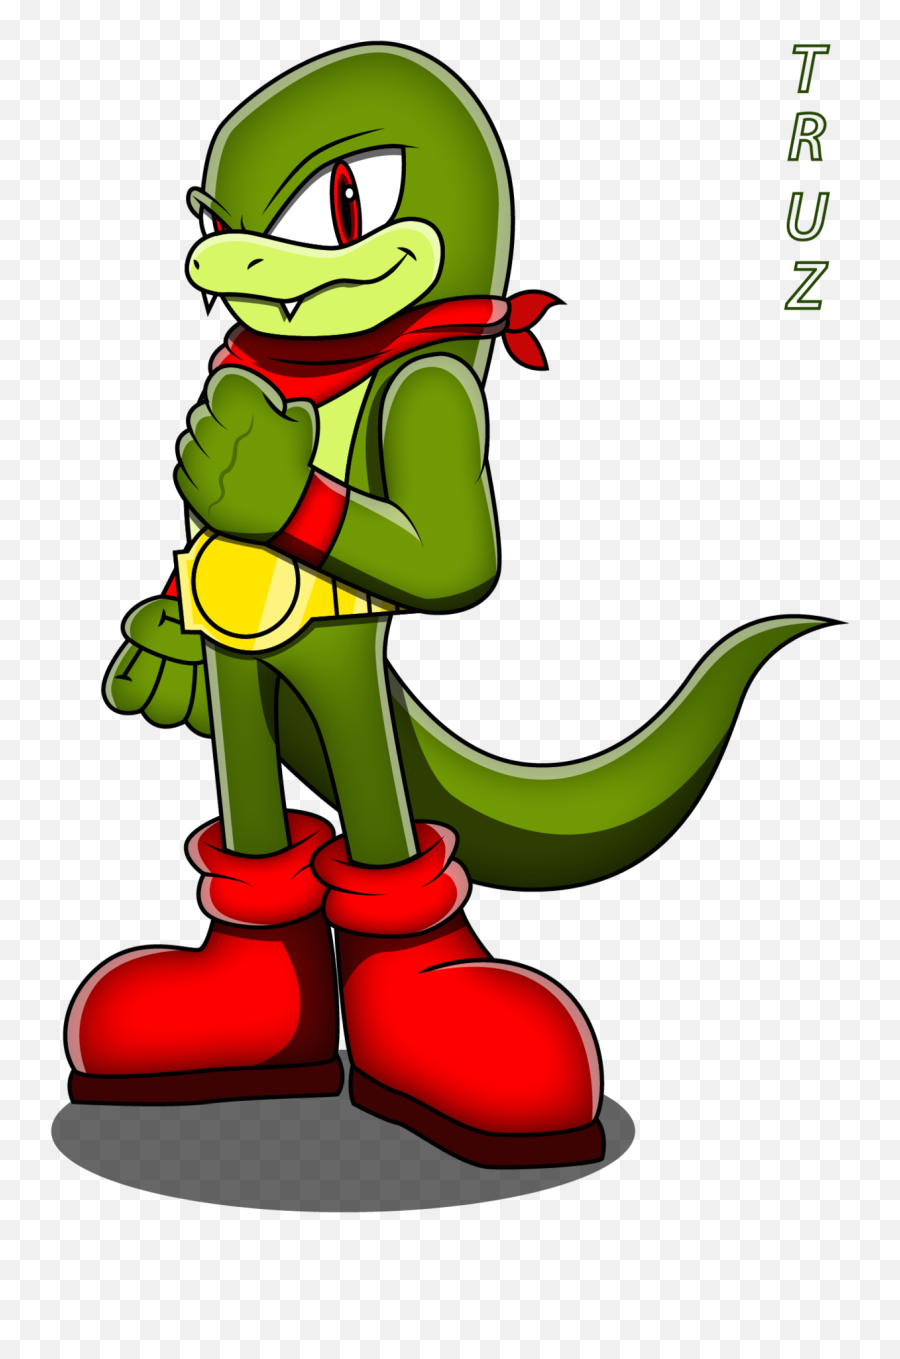 Download Sonic Komodo Dragon - Full Size Png Image Pngkit Dragon De Komodo  Animated,Komodo Dragon Png - free transparent png images 